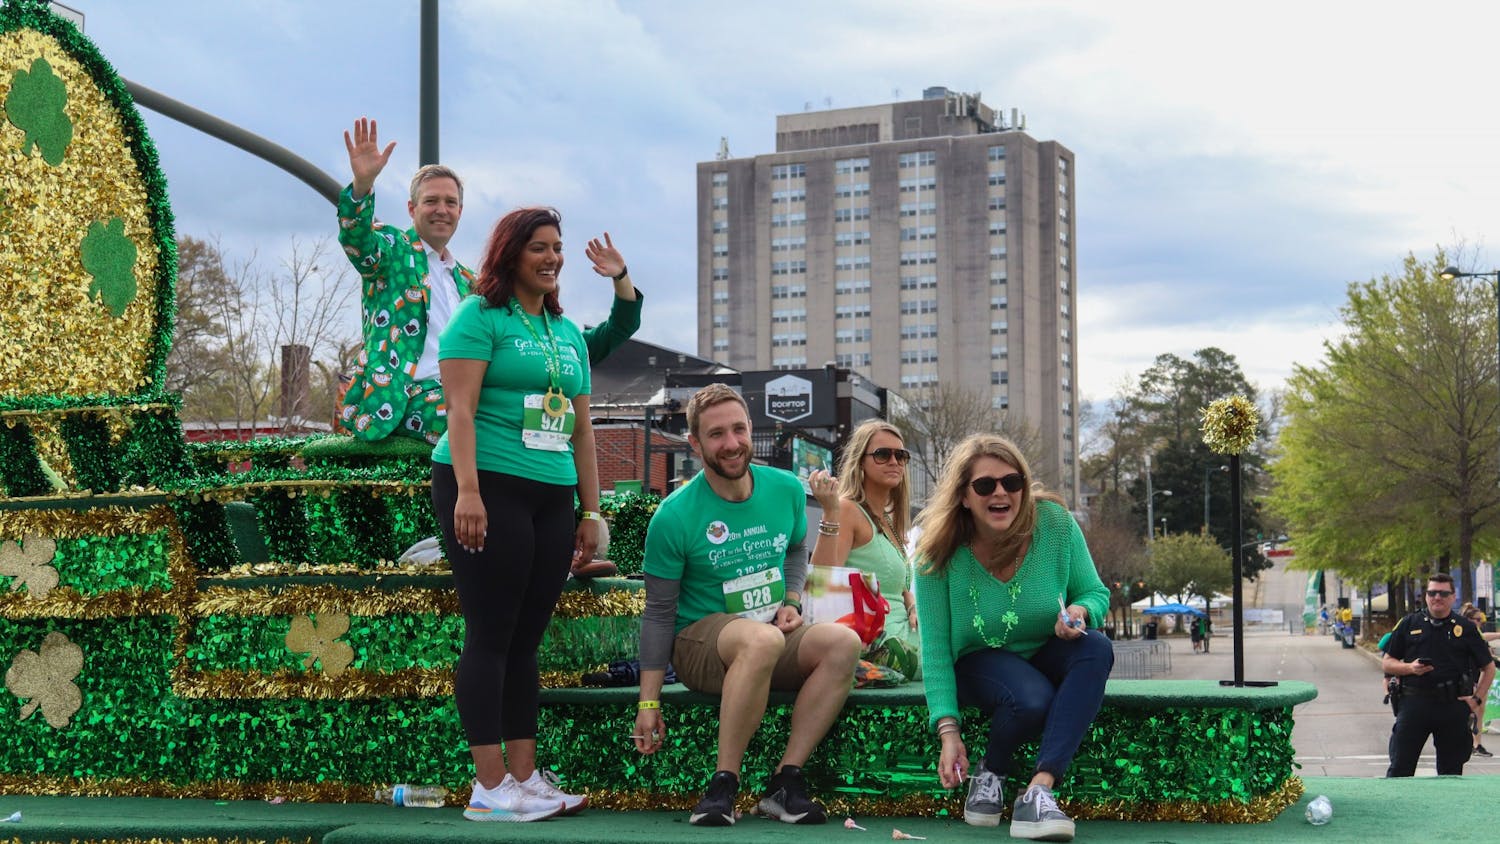 The 40th Annual St. Pat's in Five Points Parade took place this past Saturday, March 19, 2022. The festival included a variety of performances, food, and parade spectacles from colorful floats to marching band fanfare.